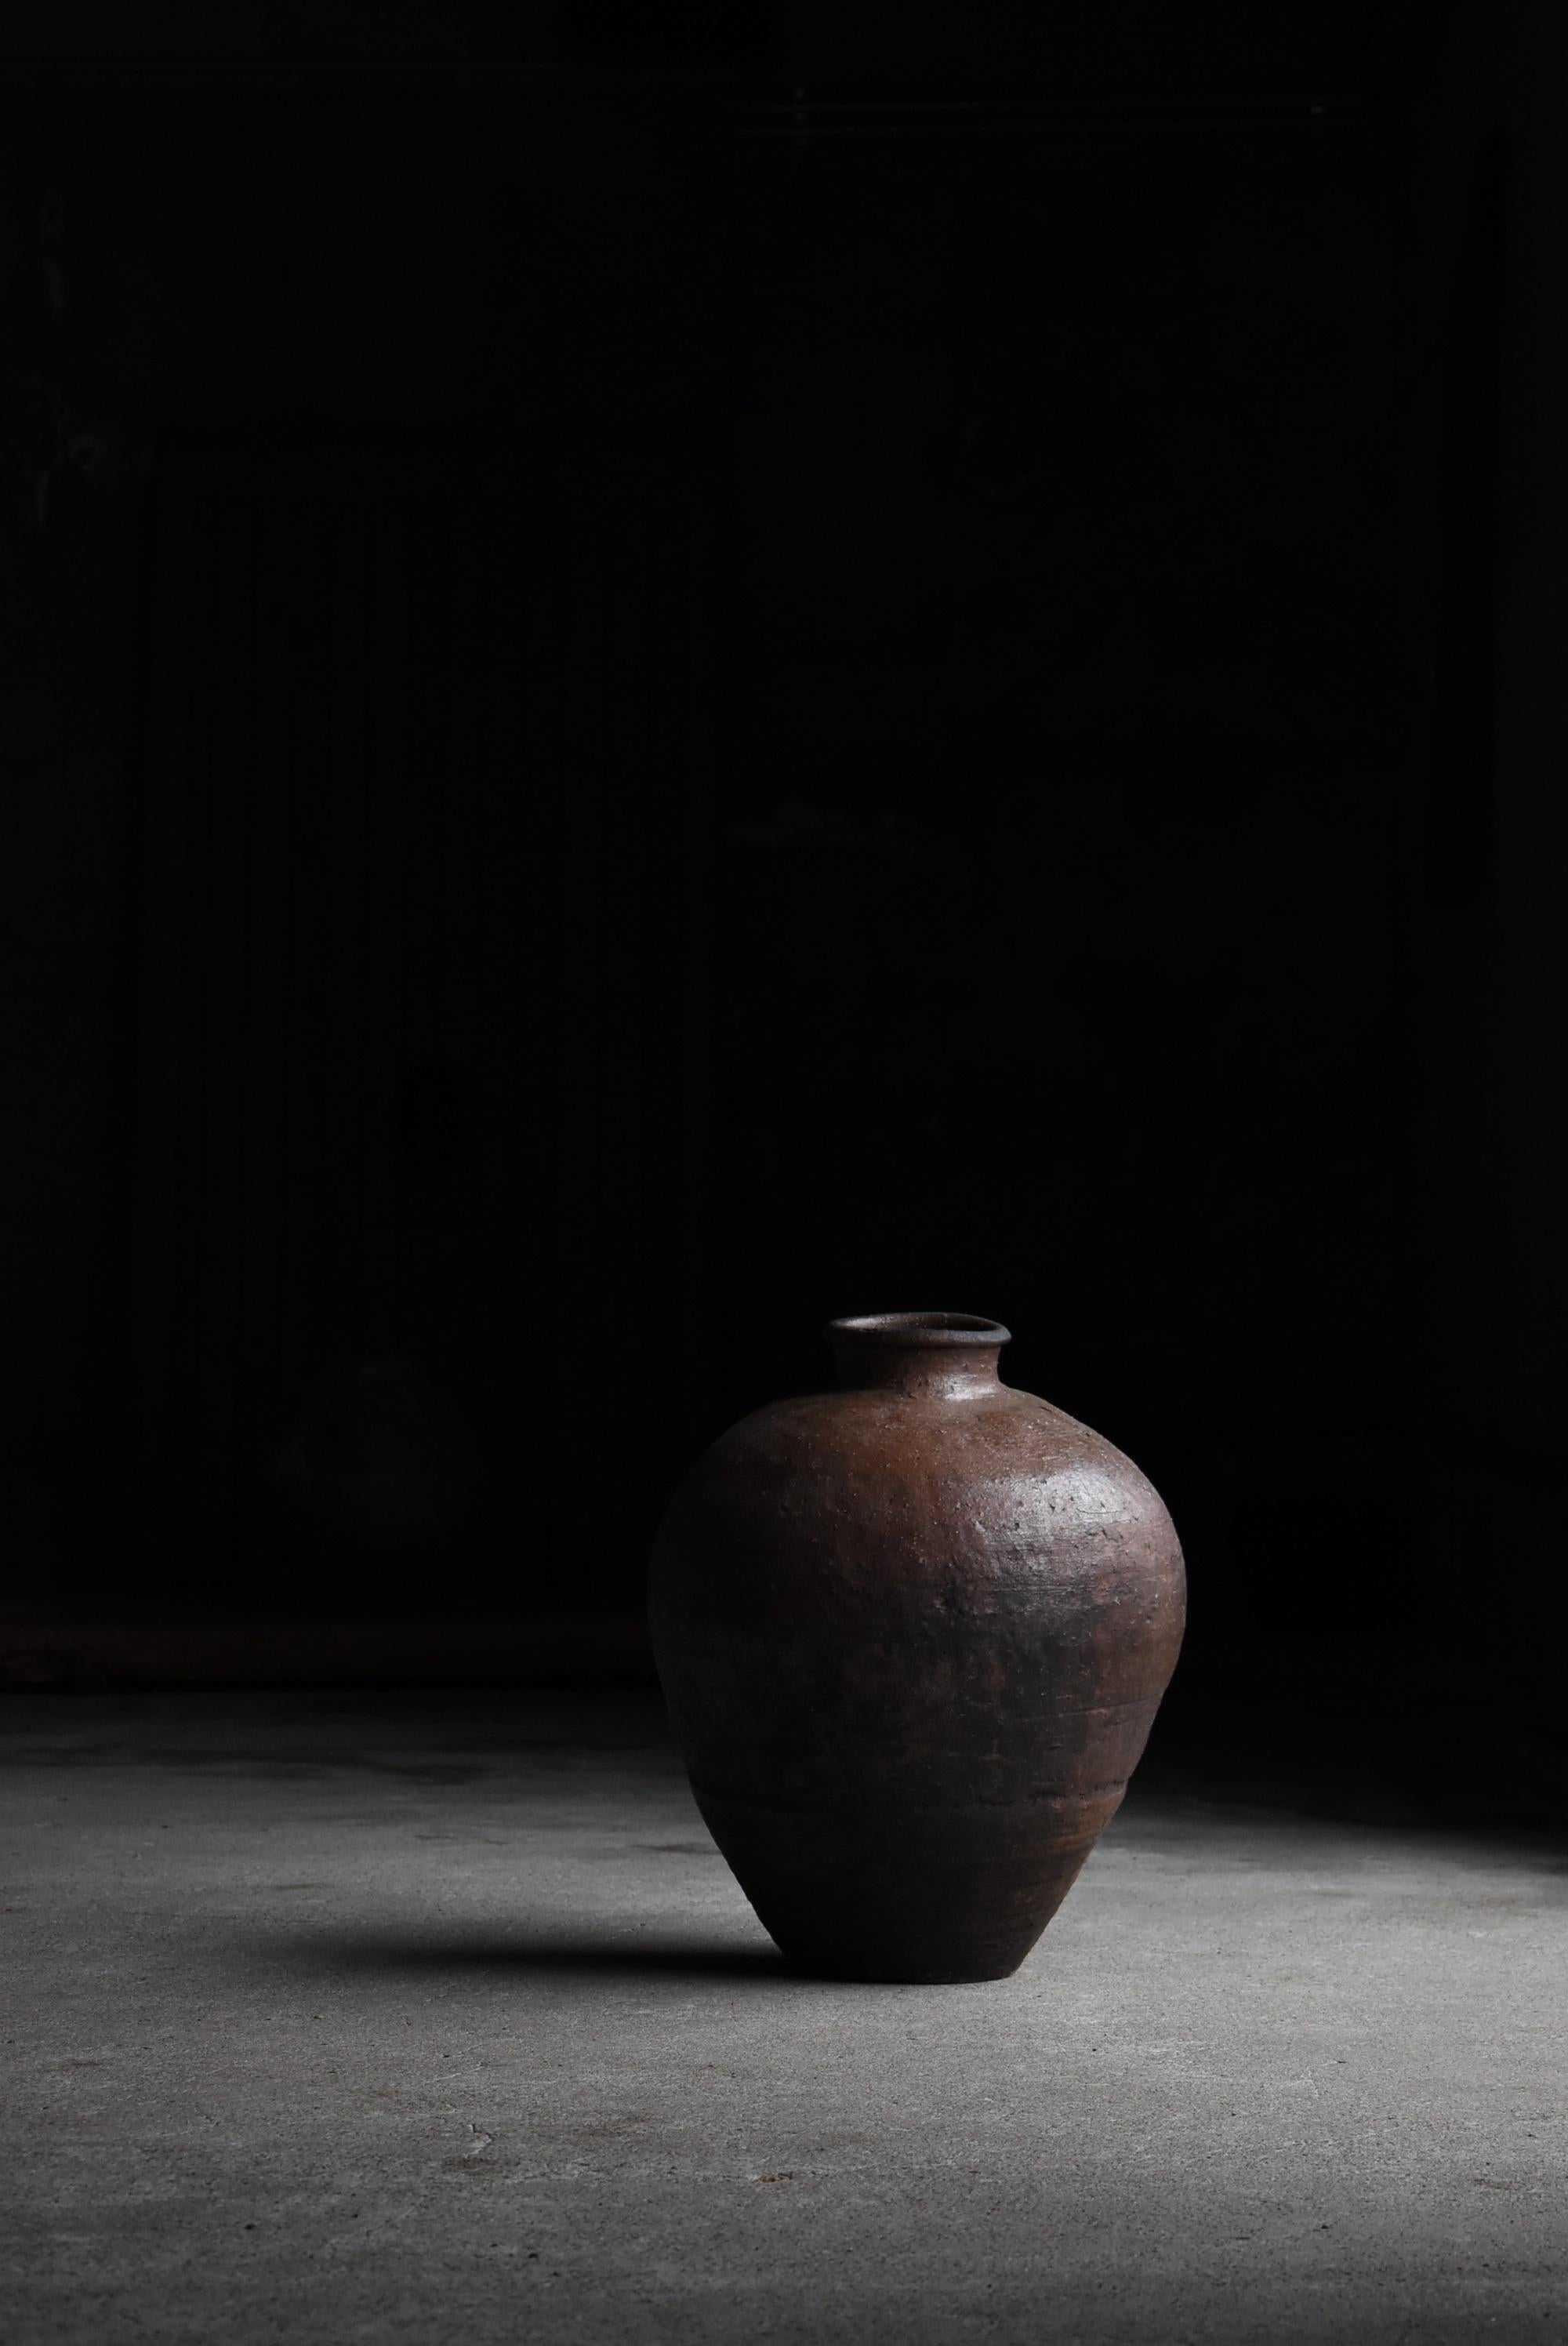 It is an old large jar baked in Shiga prefecture (Shiga prefecture) in Japan.
It seems to be in the latter half of the Edo period (1800-1860).
Used for storing tea leaves.

It tastes great over time.
It has a smart and beautiful